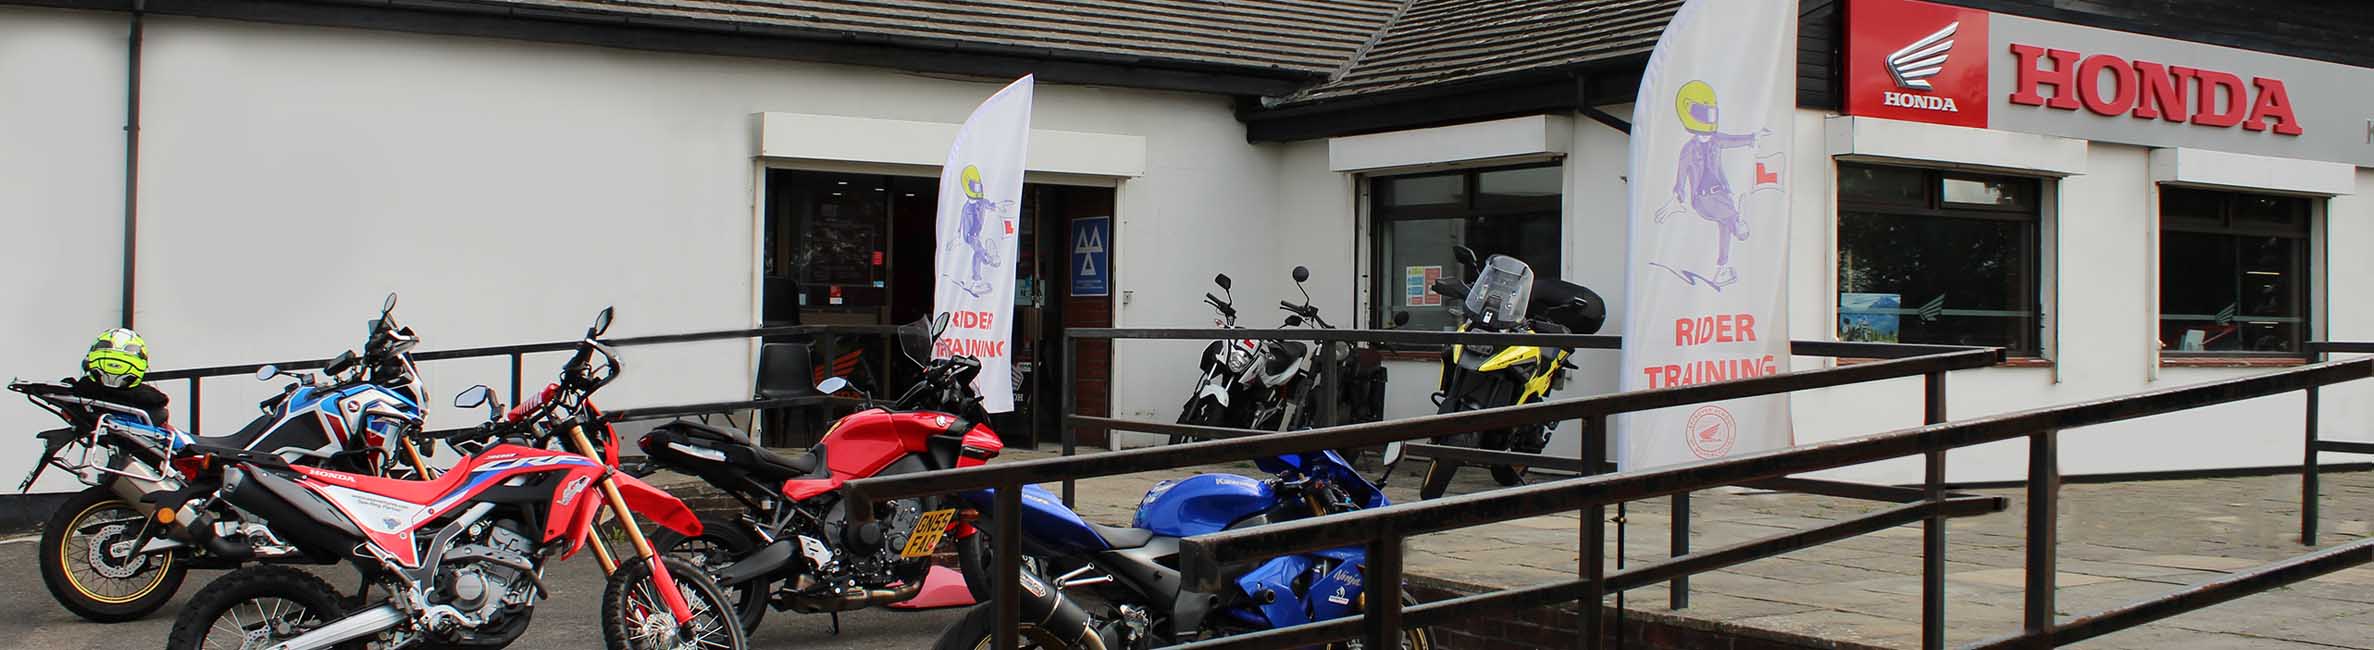 Kent Motorcycles - Outside the Showroom